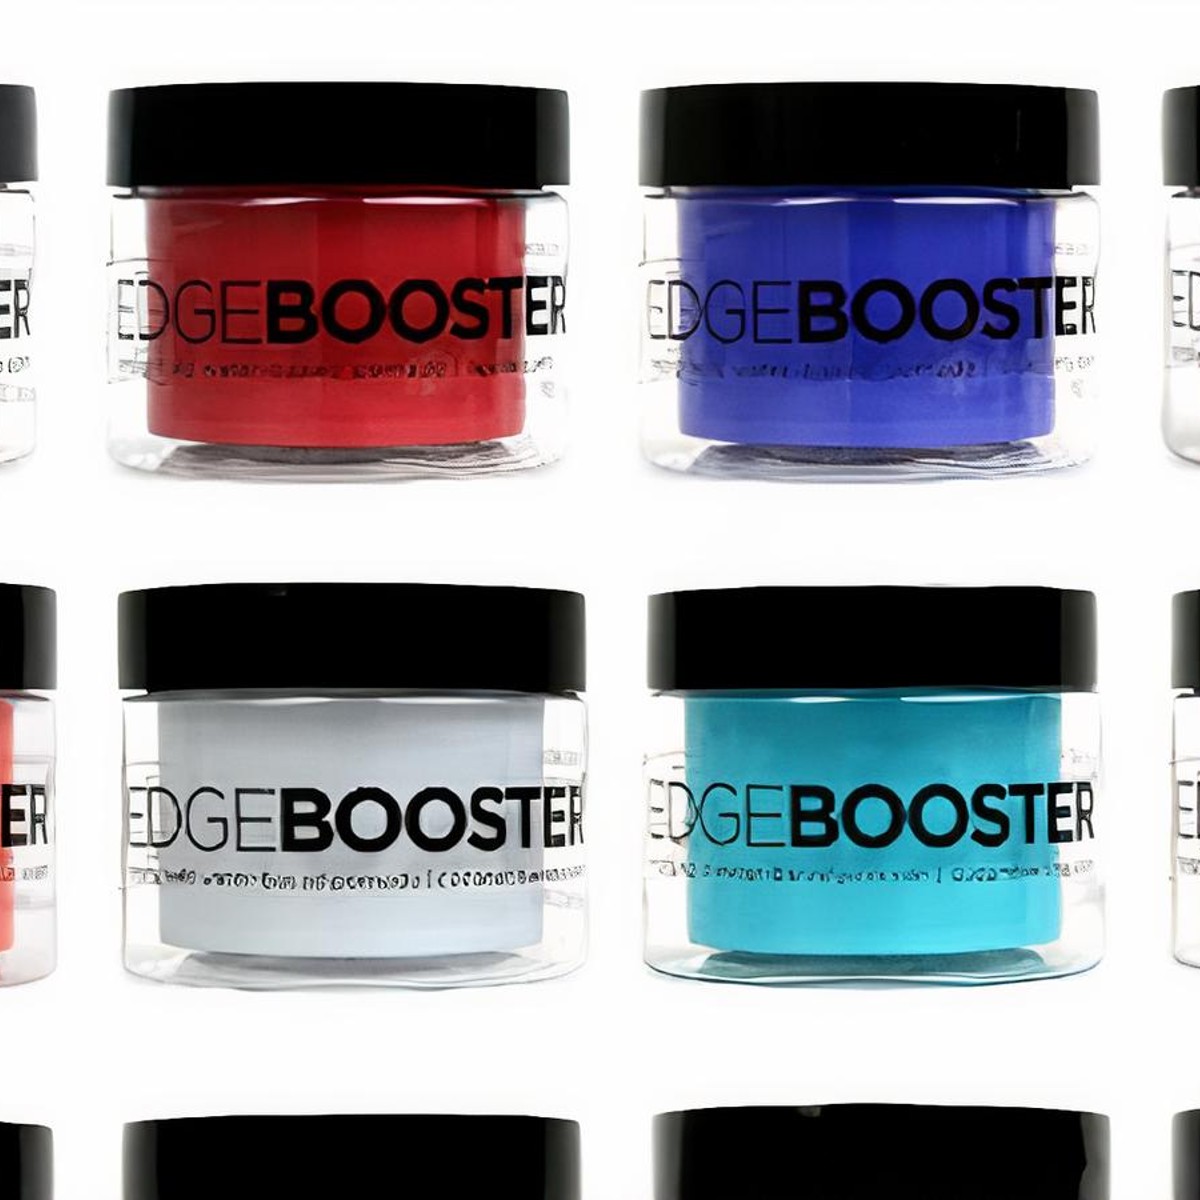 Style Factor: EDGE BOOSTER MOISTURE RICH POMADE 0.5oz